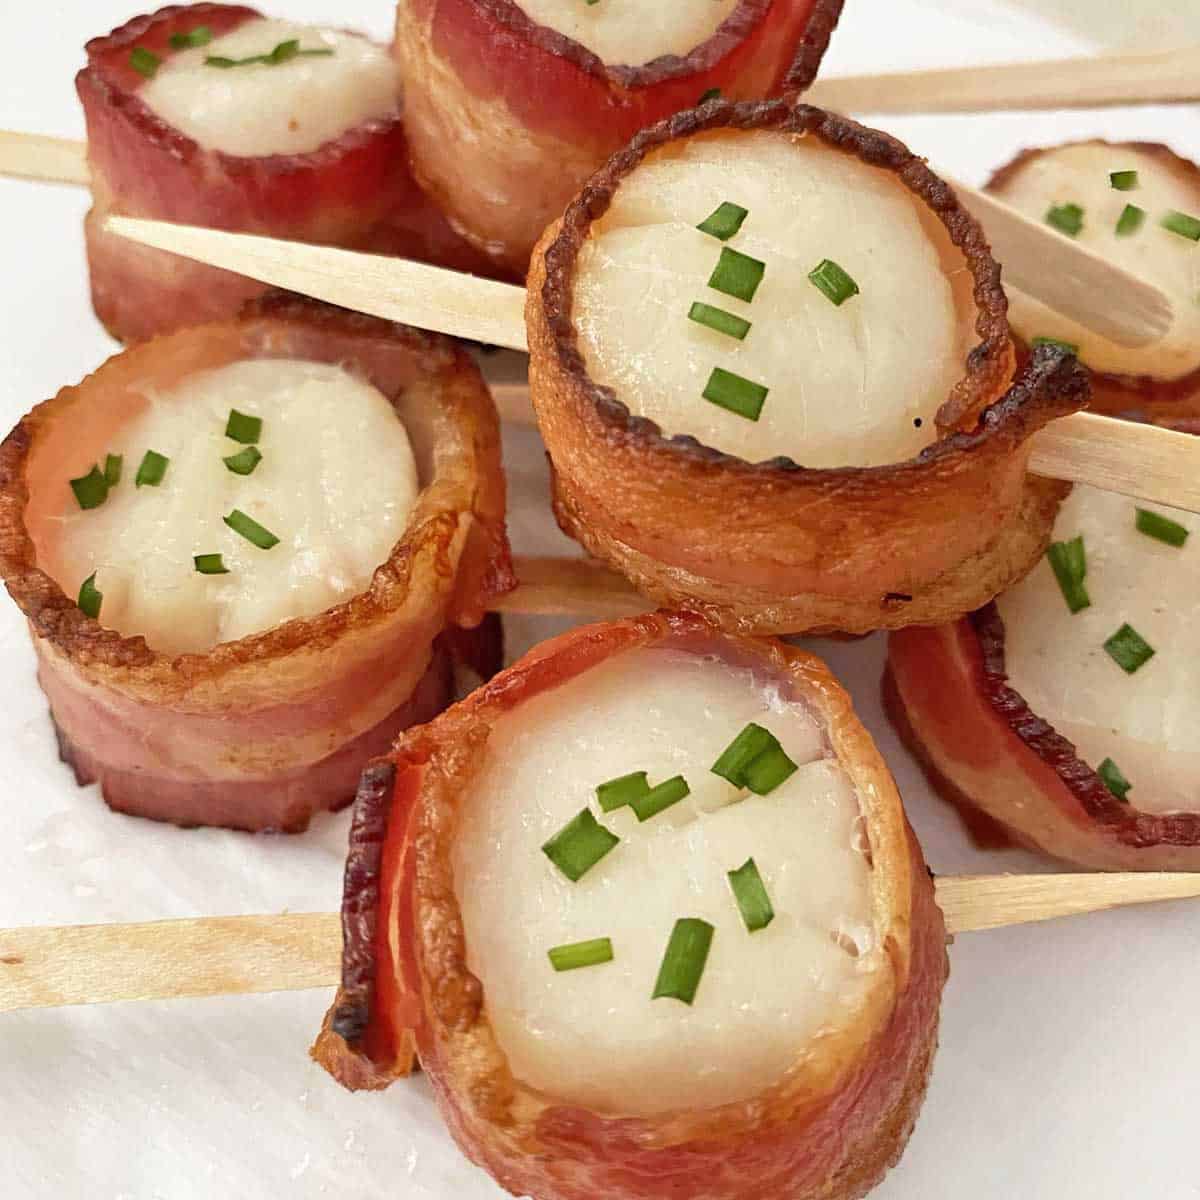 A pile of bacon wrapped scallops garnished with chives on a white background.